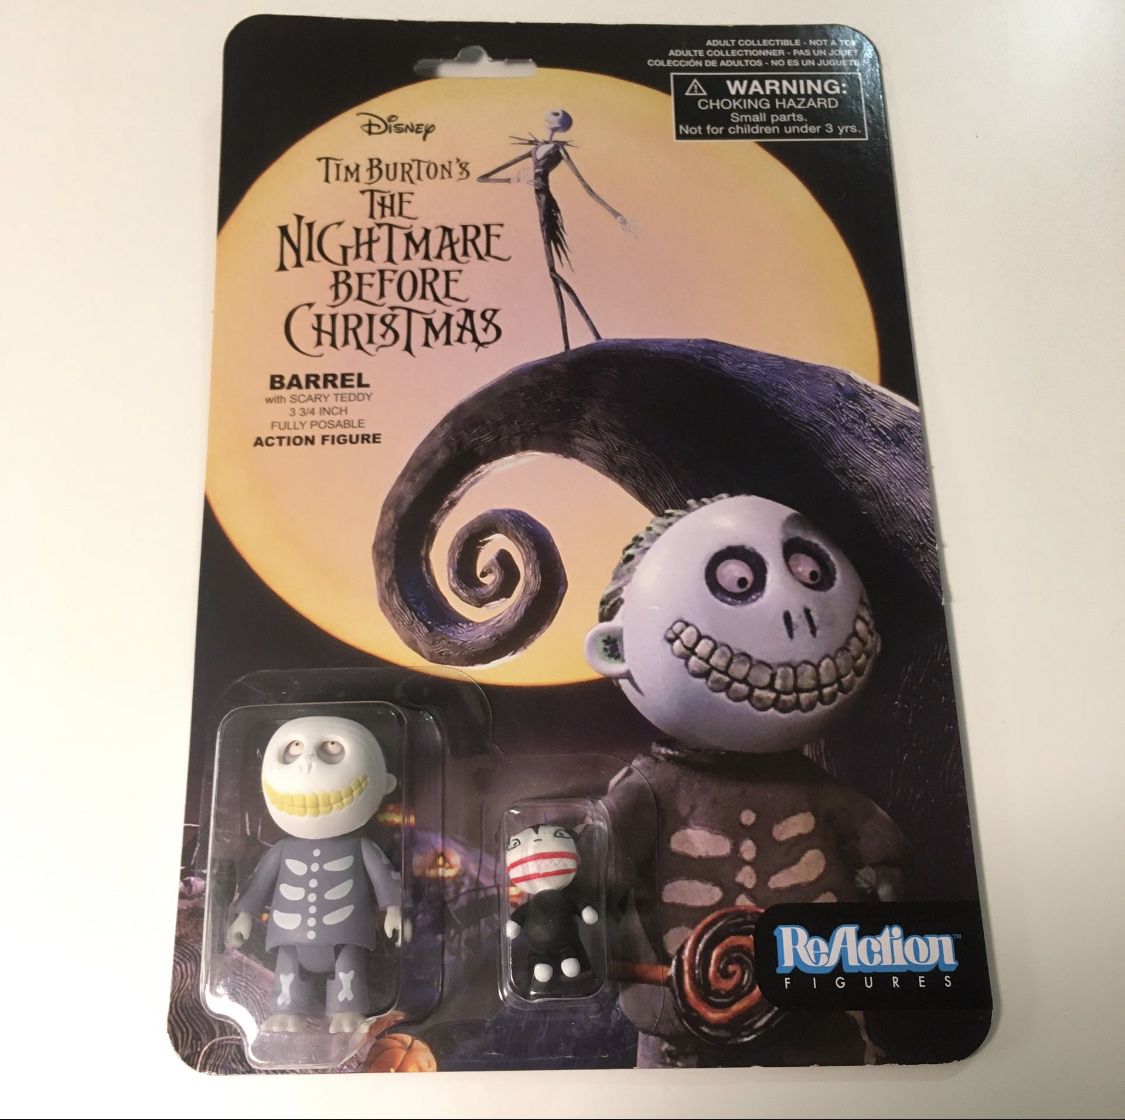 Barrel With Scary Teddy The Nightmare Before Christmas Funko Reaction Figures